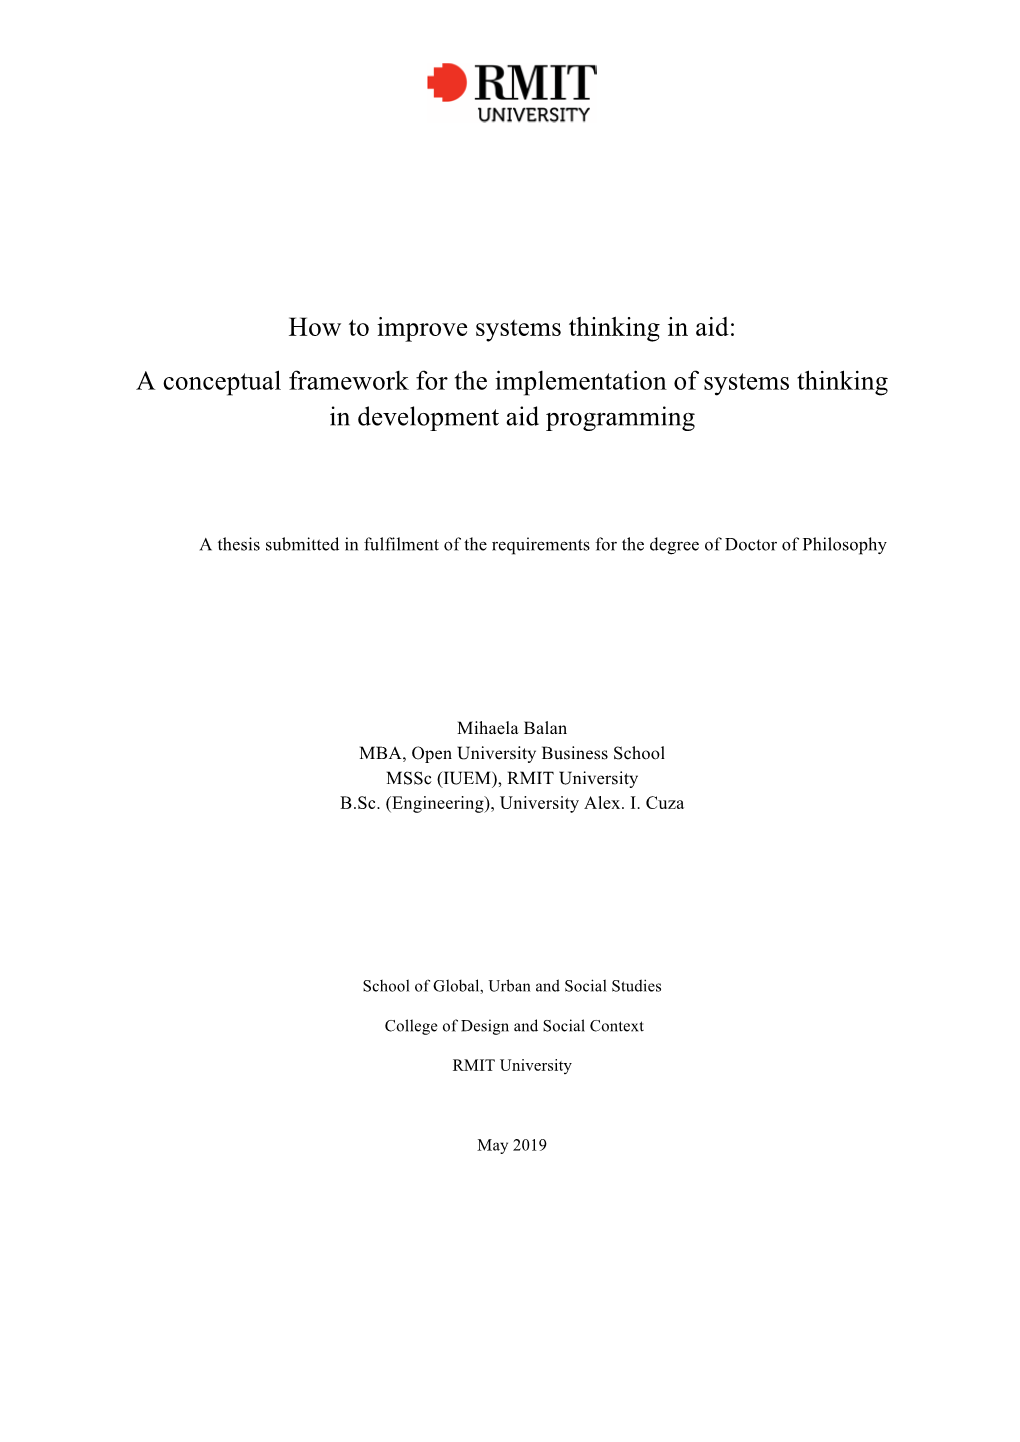 A Conceptual Framework for the Implementation of Systems Thinking in Development Aid Programming